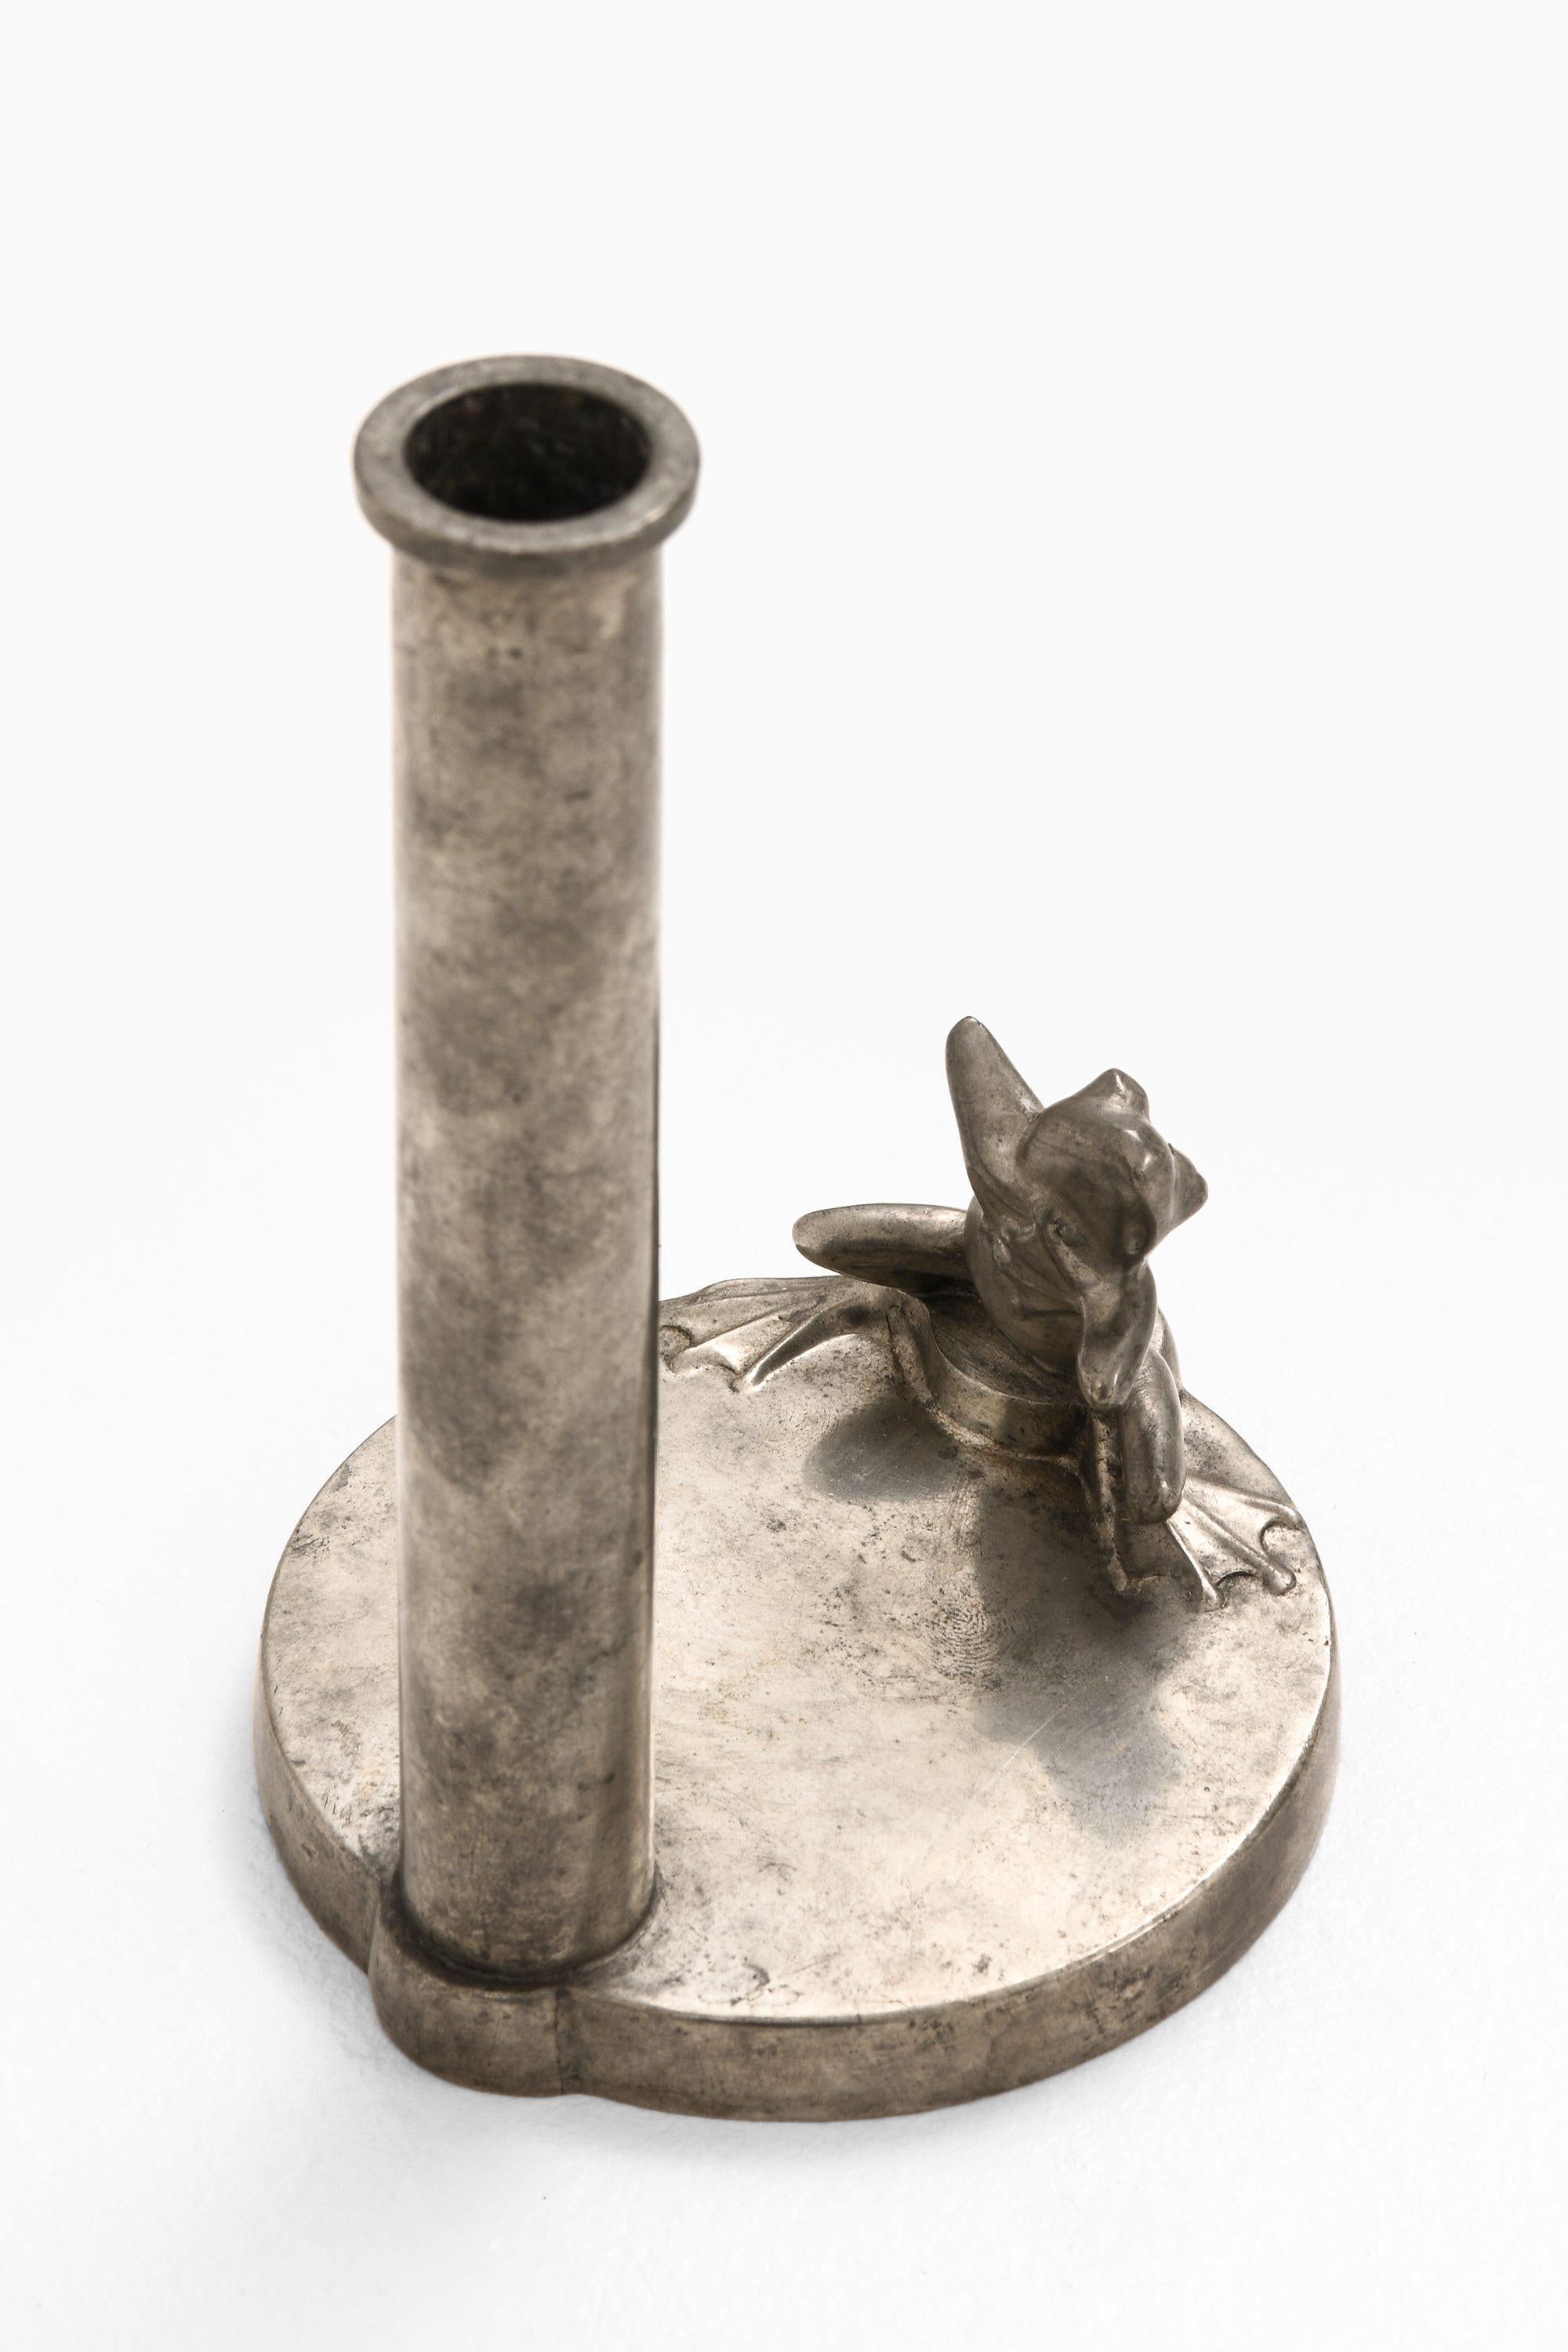 Art Deco Candlestick with Frog in Pewter, 1934

Additional Information:
Material: Pewter
Style: Mid century, Scandinavian
Produced by GAB in Sweden
Dimensions (W x D x H): 9.5 x 9.5 x 15.5 cm
Condition: Good vintage condition, with minor signs of